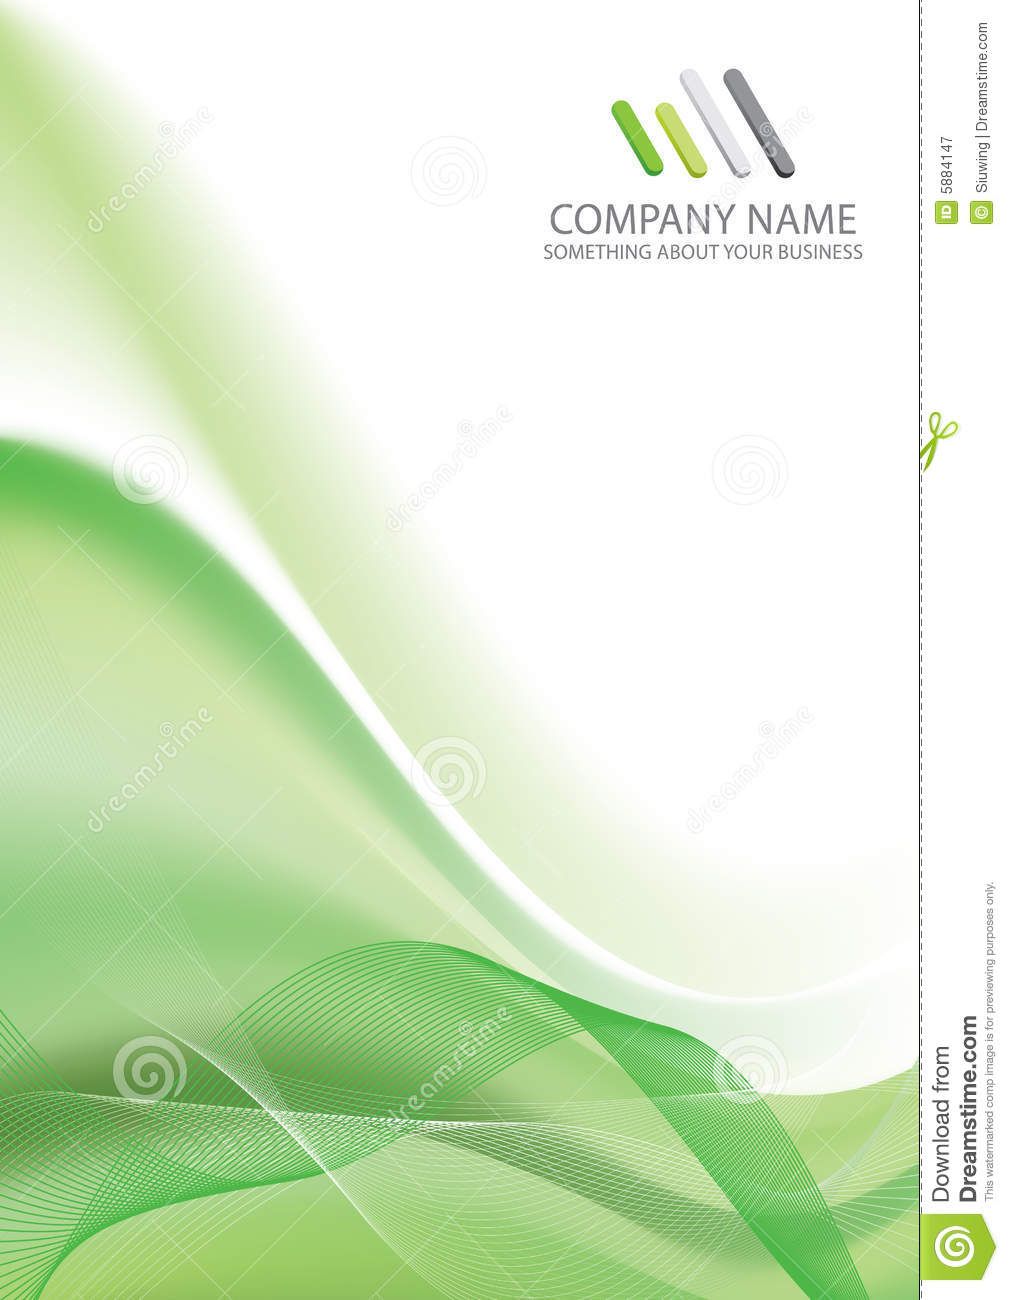 Report cover page template free